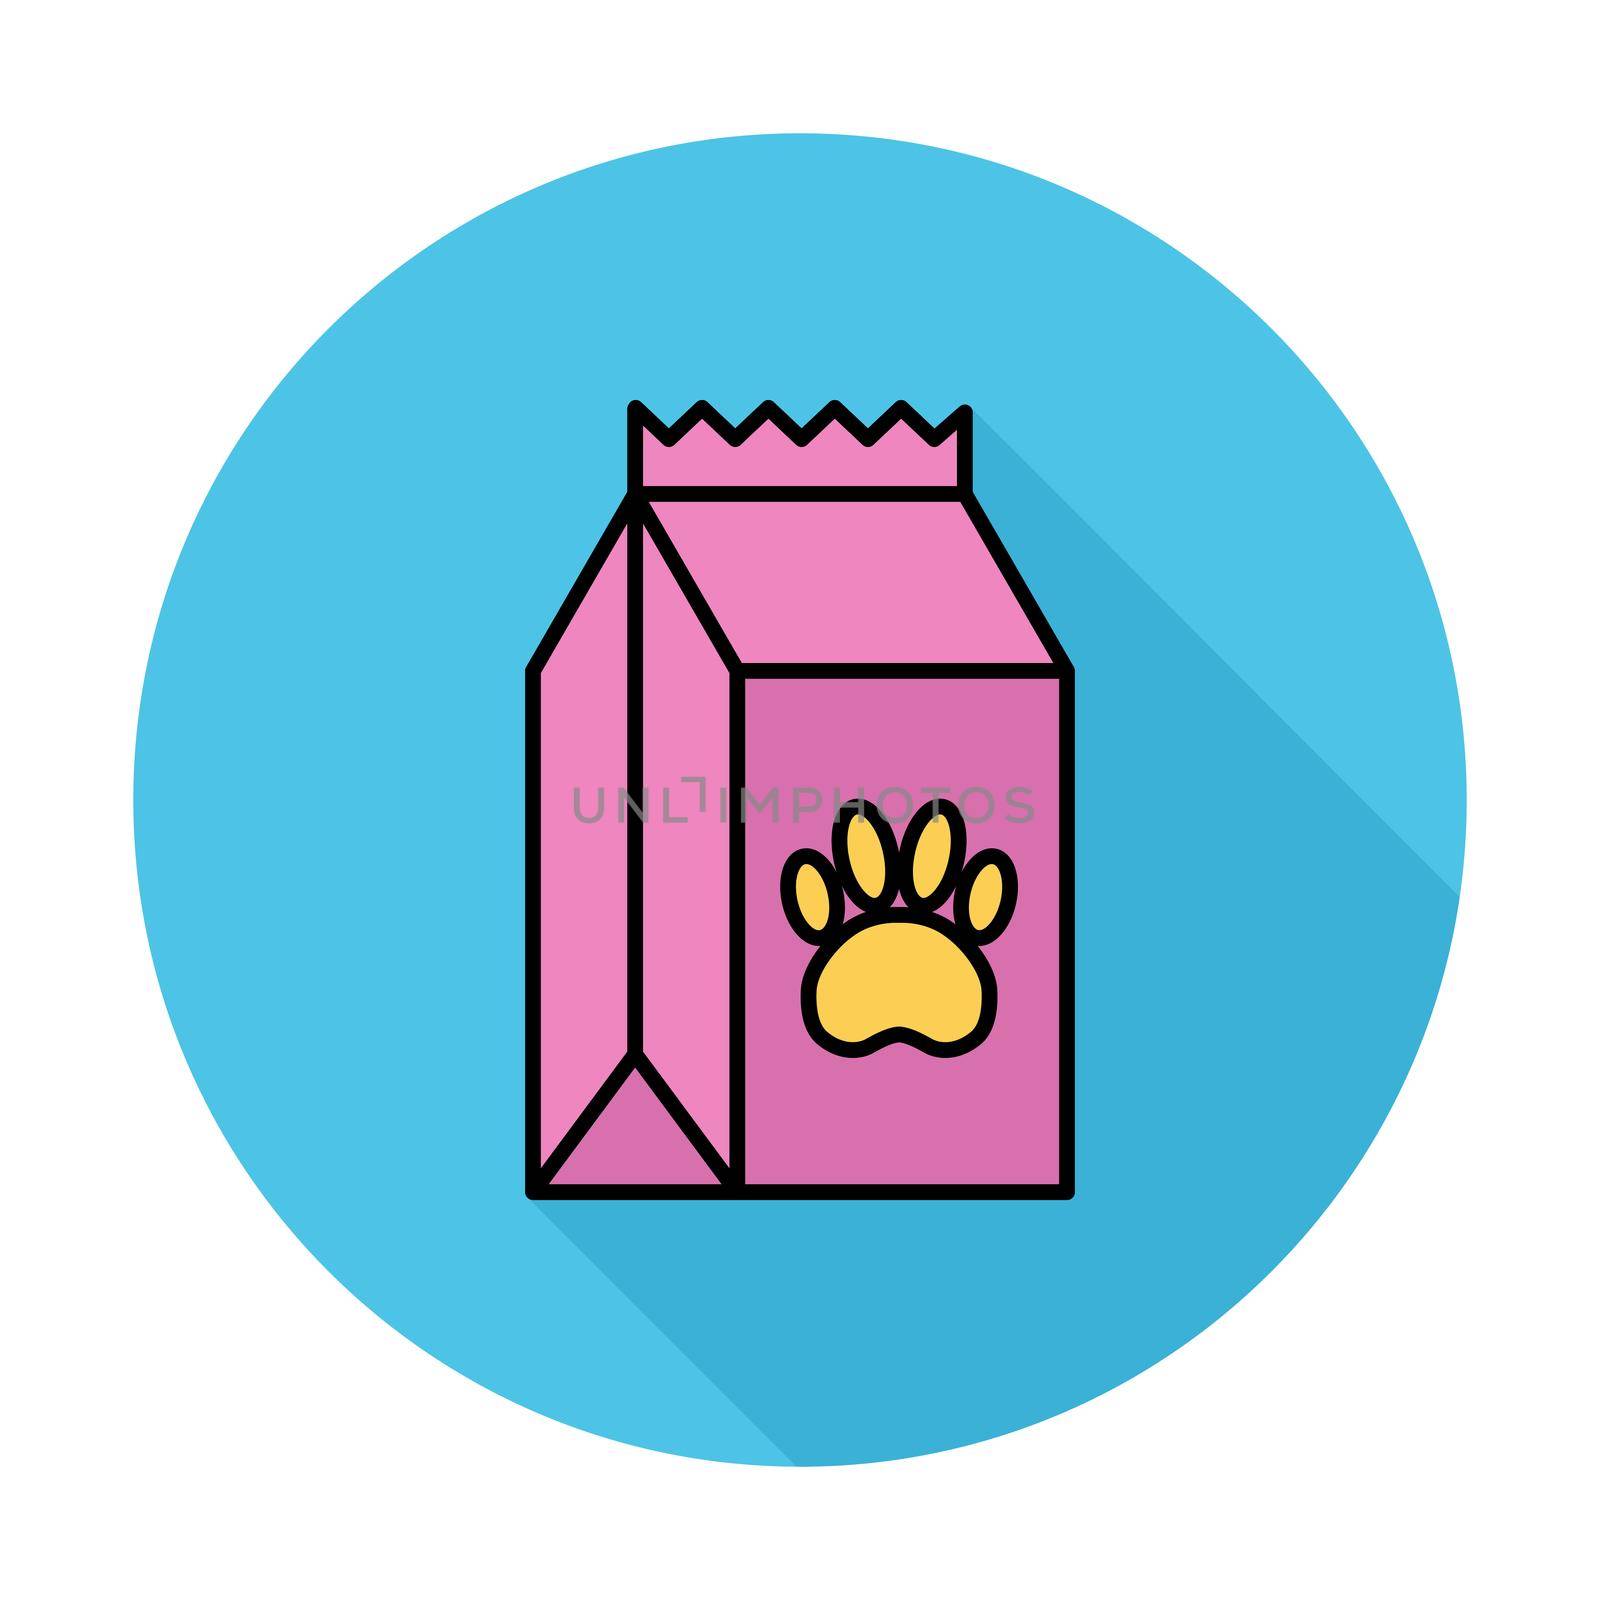 Pet food bag icon. Line flat related icon for web and mobile applications. It can be used as - logo, pictogram, icon, infographic element. Illustration.